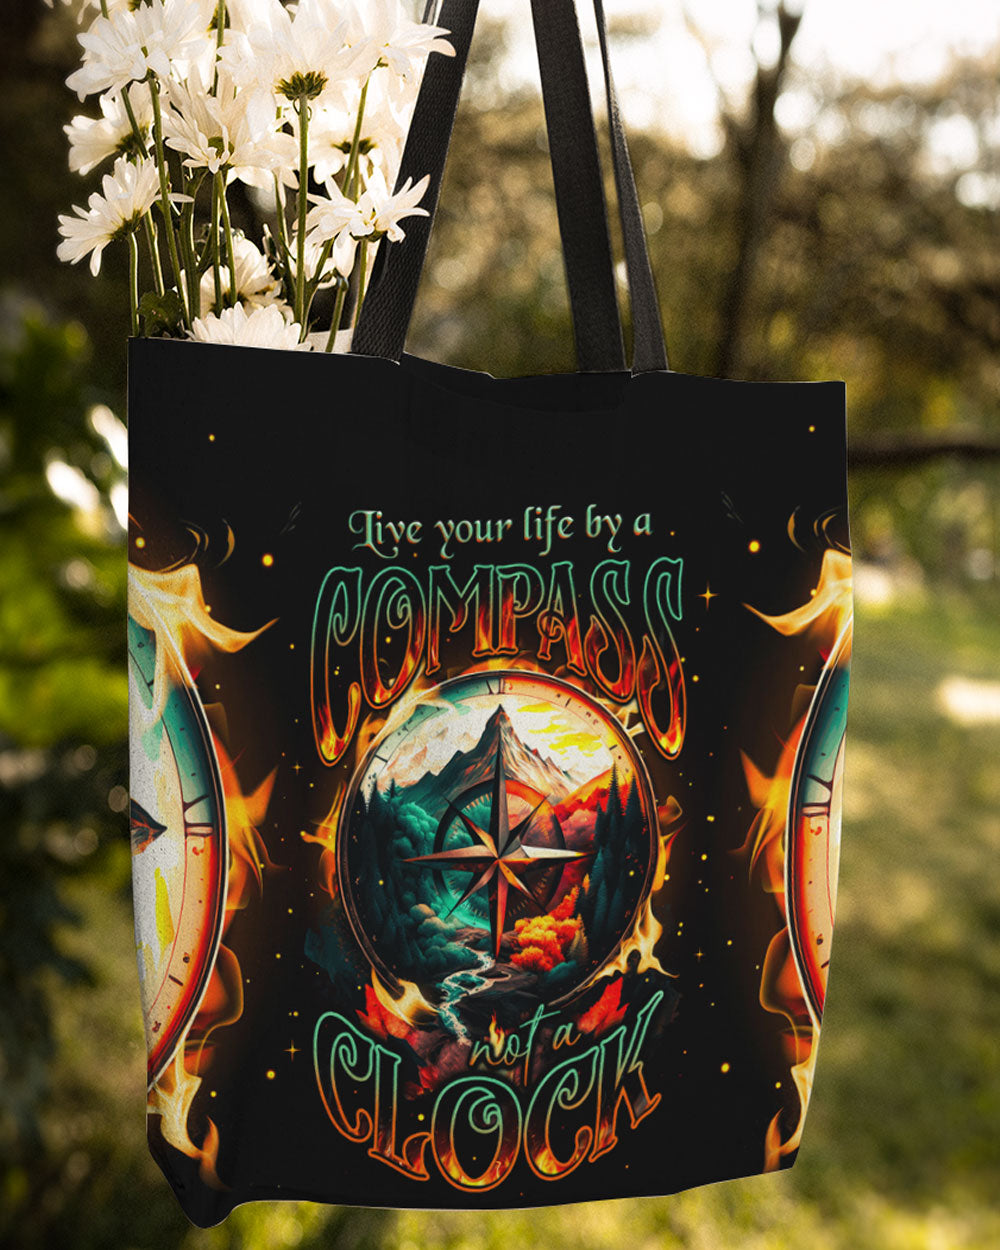 LIVE YOUR LIFE BY A COMPASS TOTE BAG - TY2804235